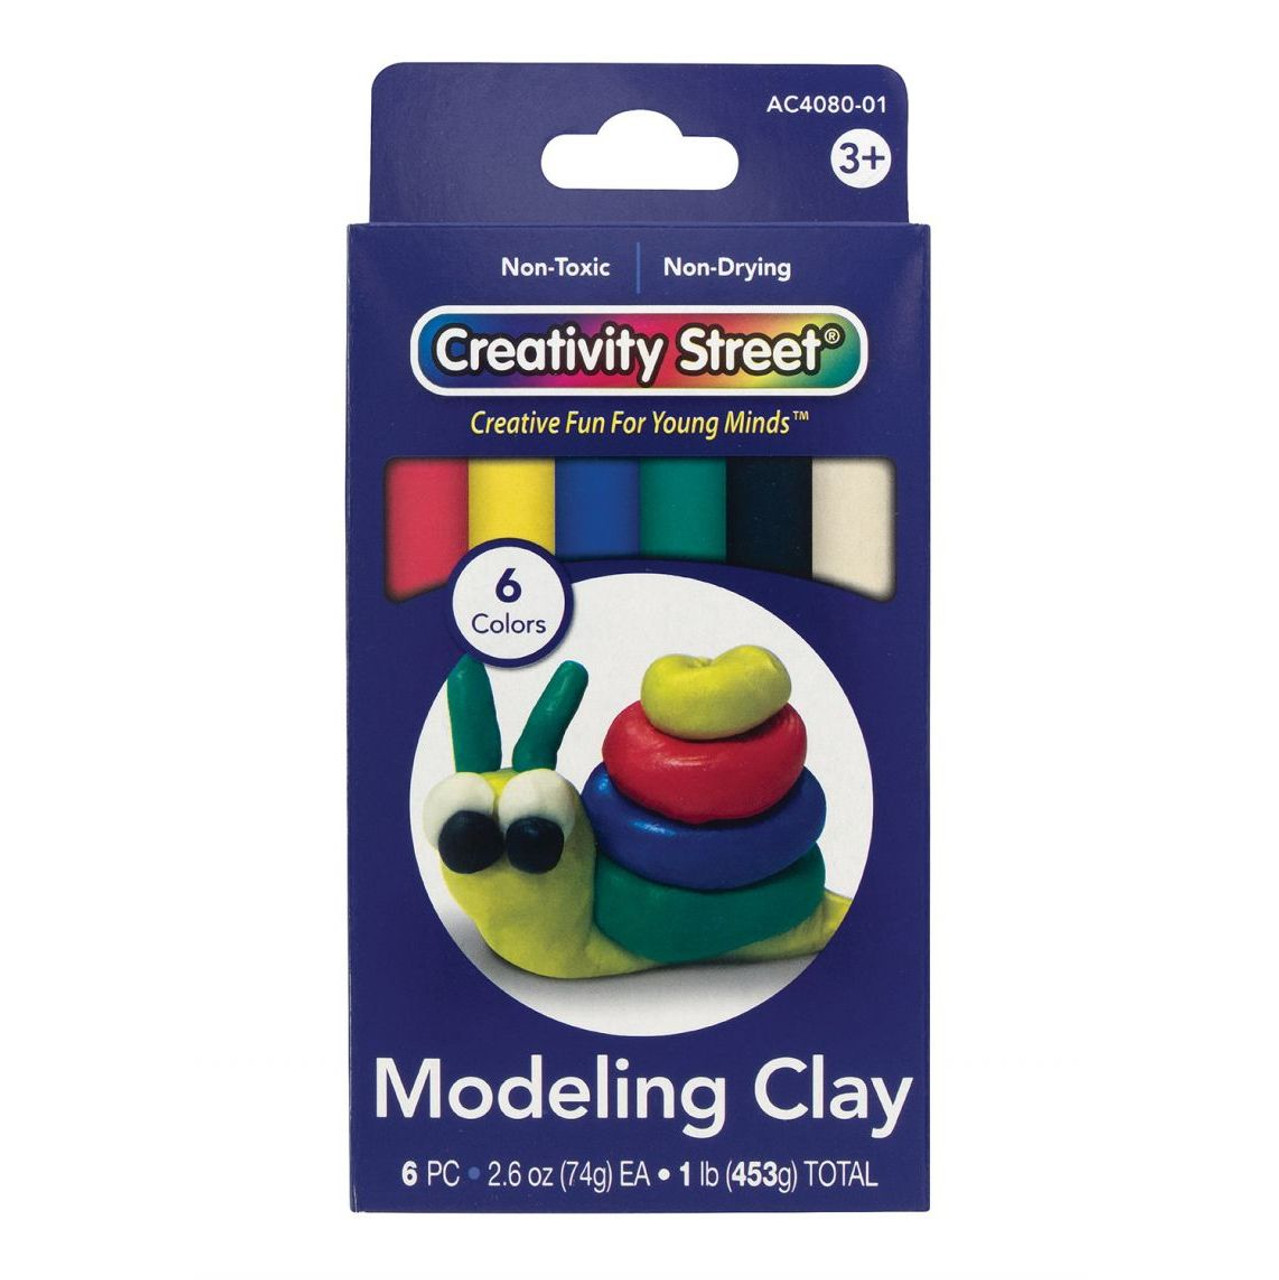 colored modelling clay, 220g, always soft - 10 colors - oekoNORM GmbH